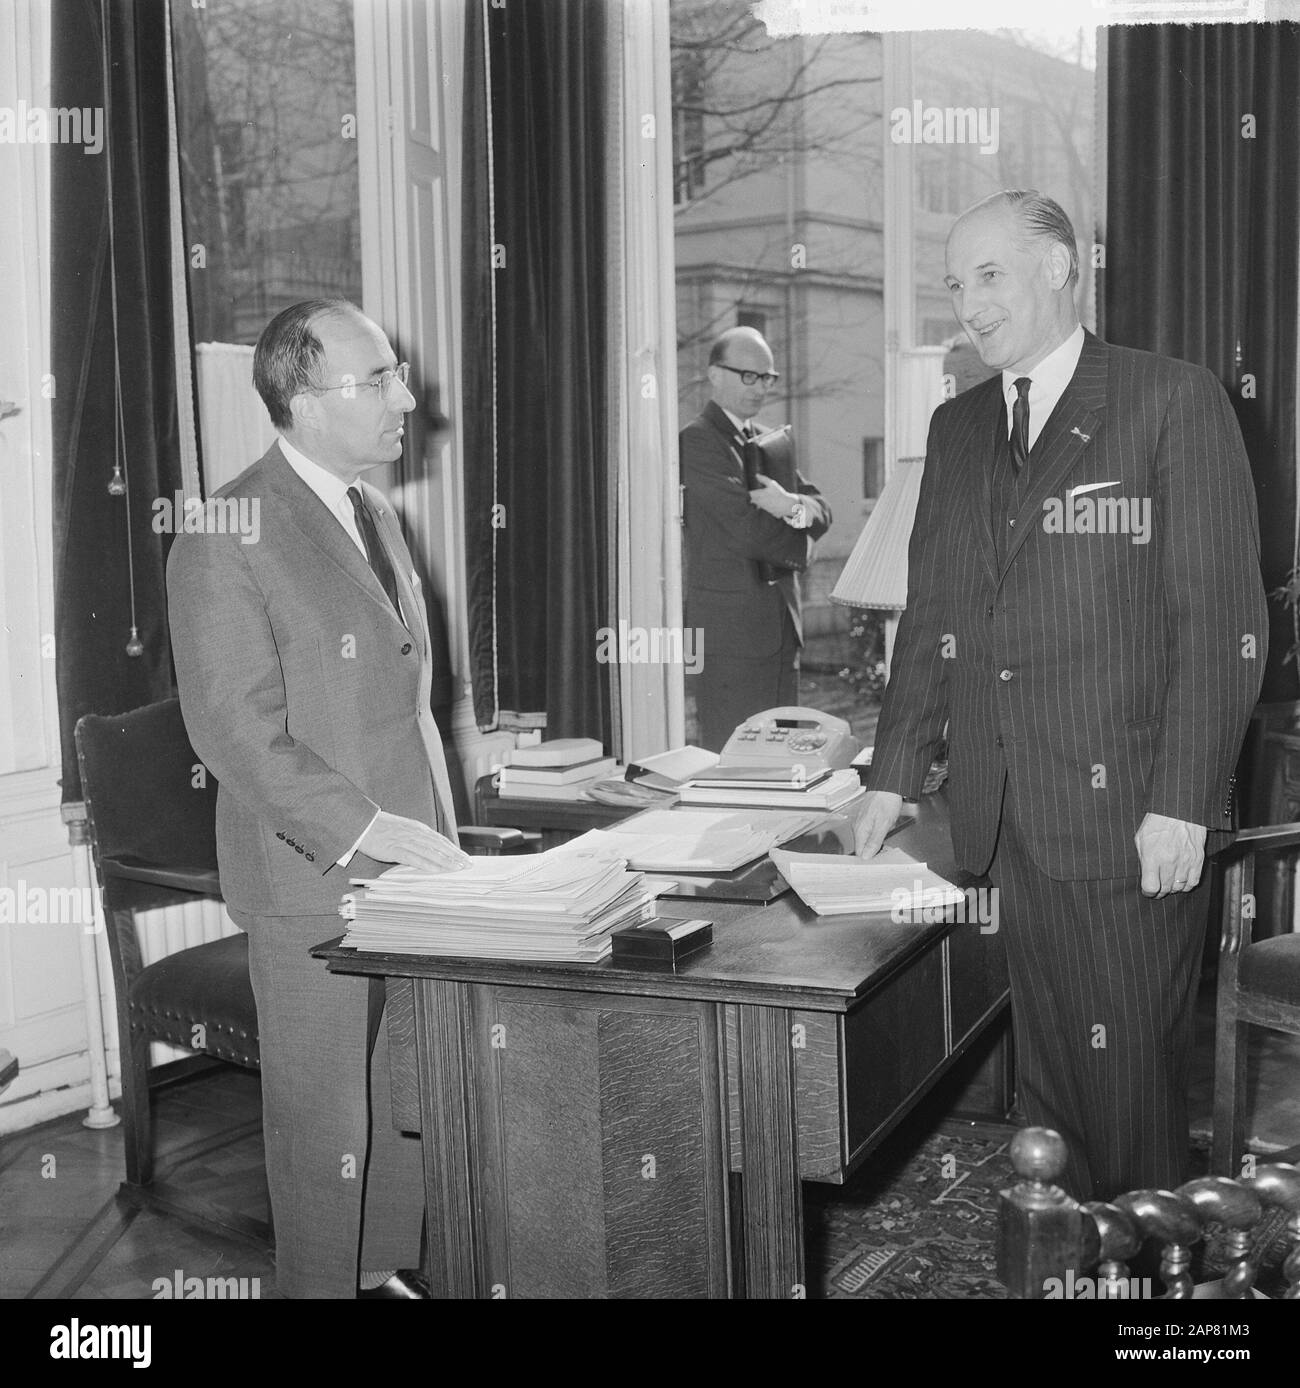 The cabinet crisis, formateur mr. Th. Cals (left) in conversation with Minister Bot of Education, Arts and Sciences Date: 22 March 1965 Location: The Hague, Zuid-Holland Keywords: formateurs, conversations, cabinets, ministers Personal name: Bot Th T, Cals Th Stock Photo